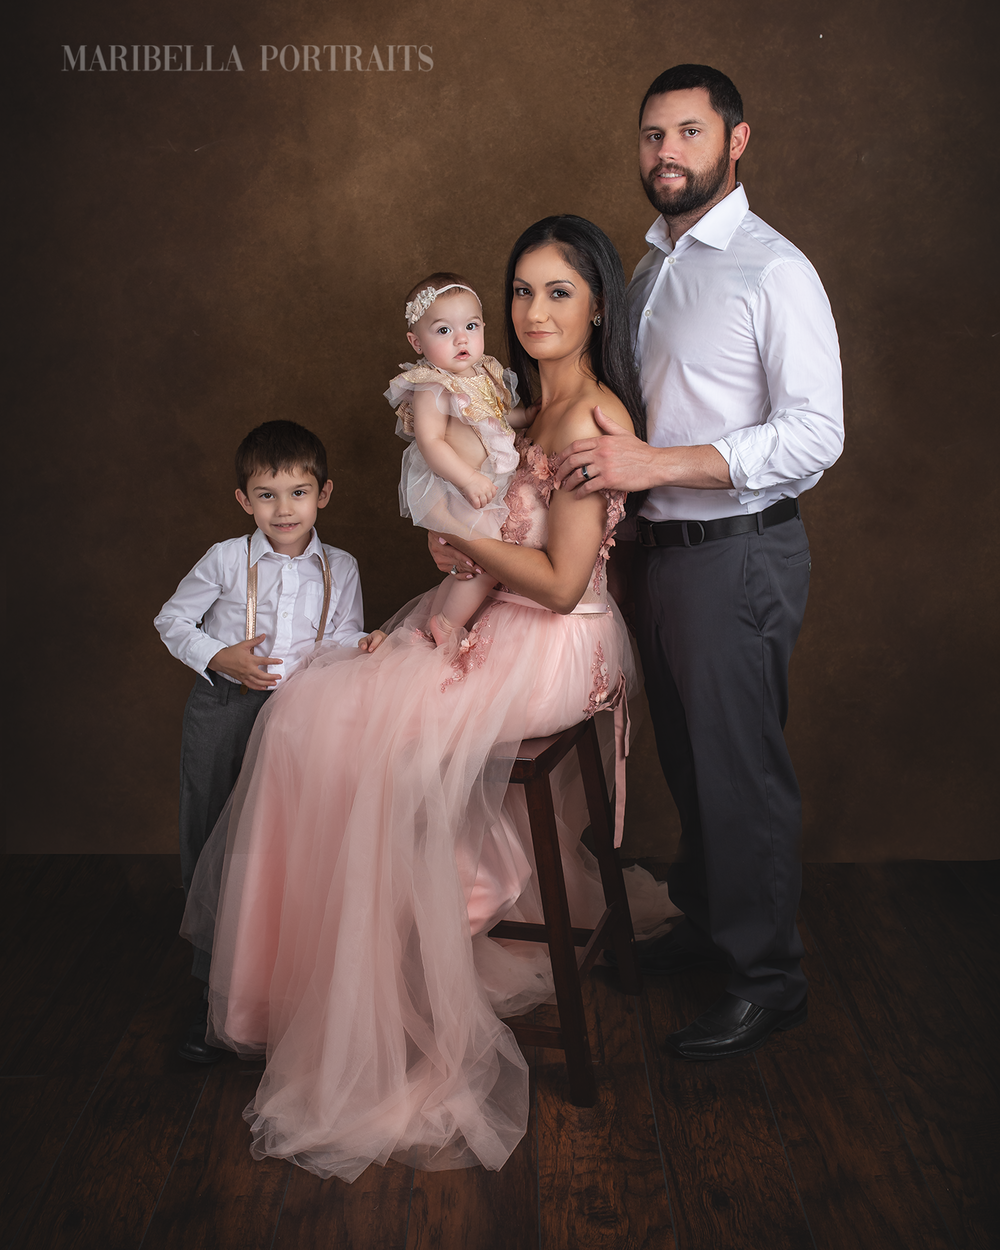 The Edwards Family  A Family Portrait in Houston, Texas — Maribella  Portraits, LLC Houstons Edgy Find Art Photographer. Combining Art and  Fashion